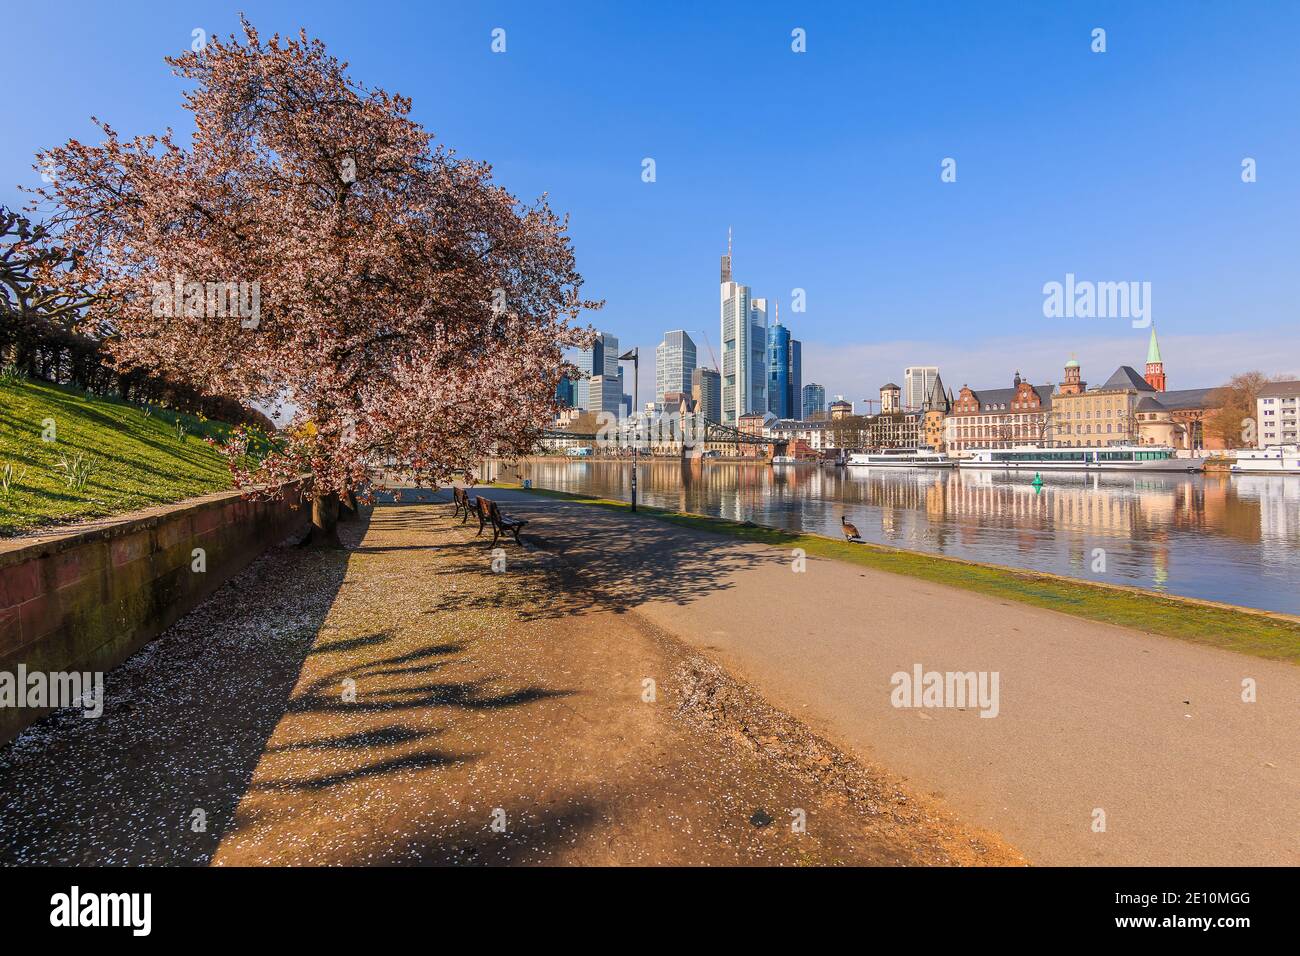 Frankfurt and the river Main with parks on the banks. City skyline in sunshine. Tree with blossom and bench along the path in spring. Ships on the pie Stock Photo